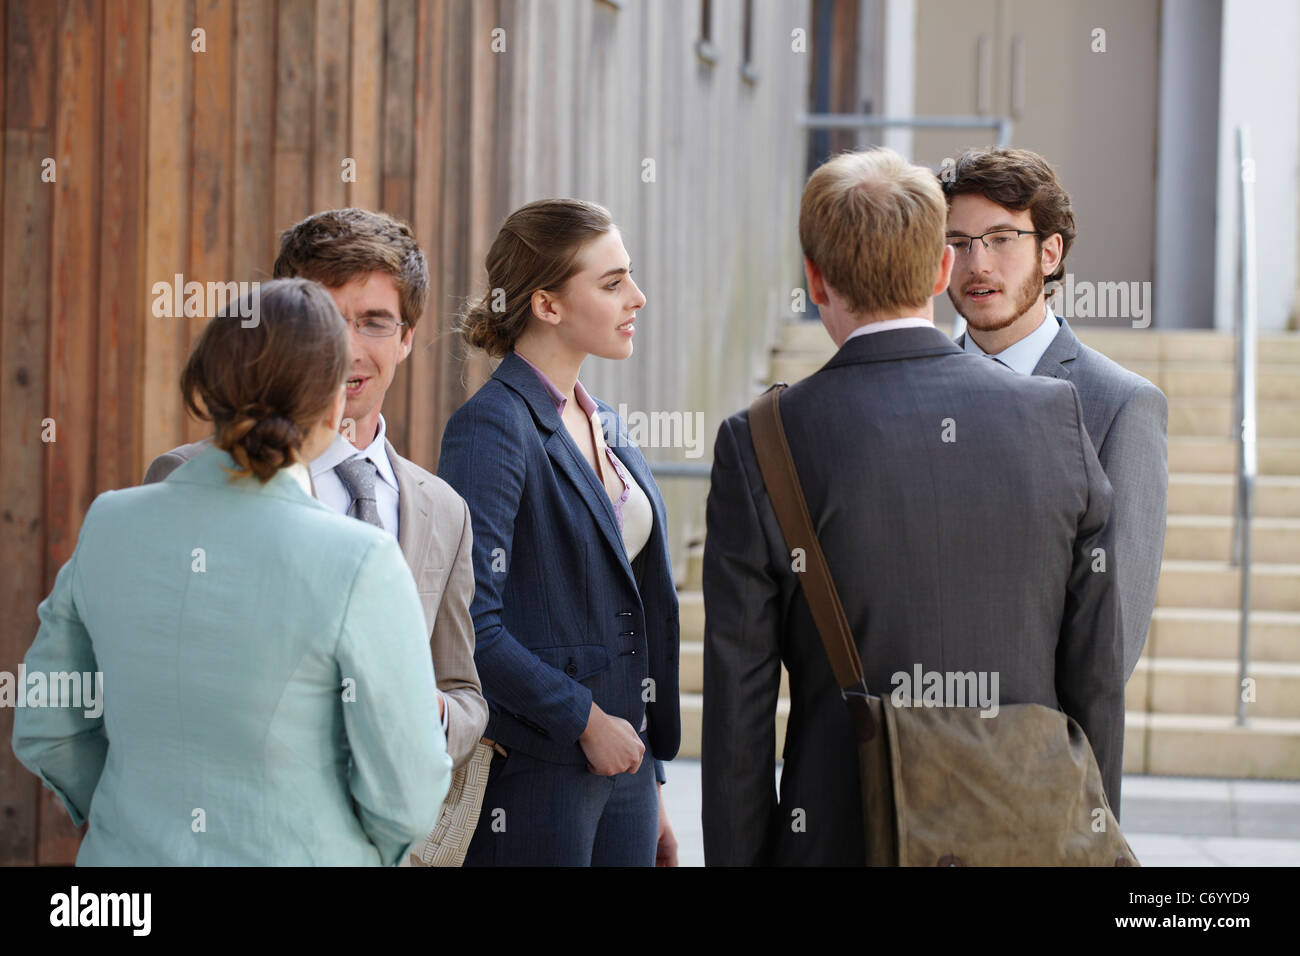 Business people talking in courtyard Stock Photo